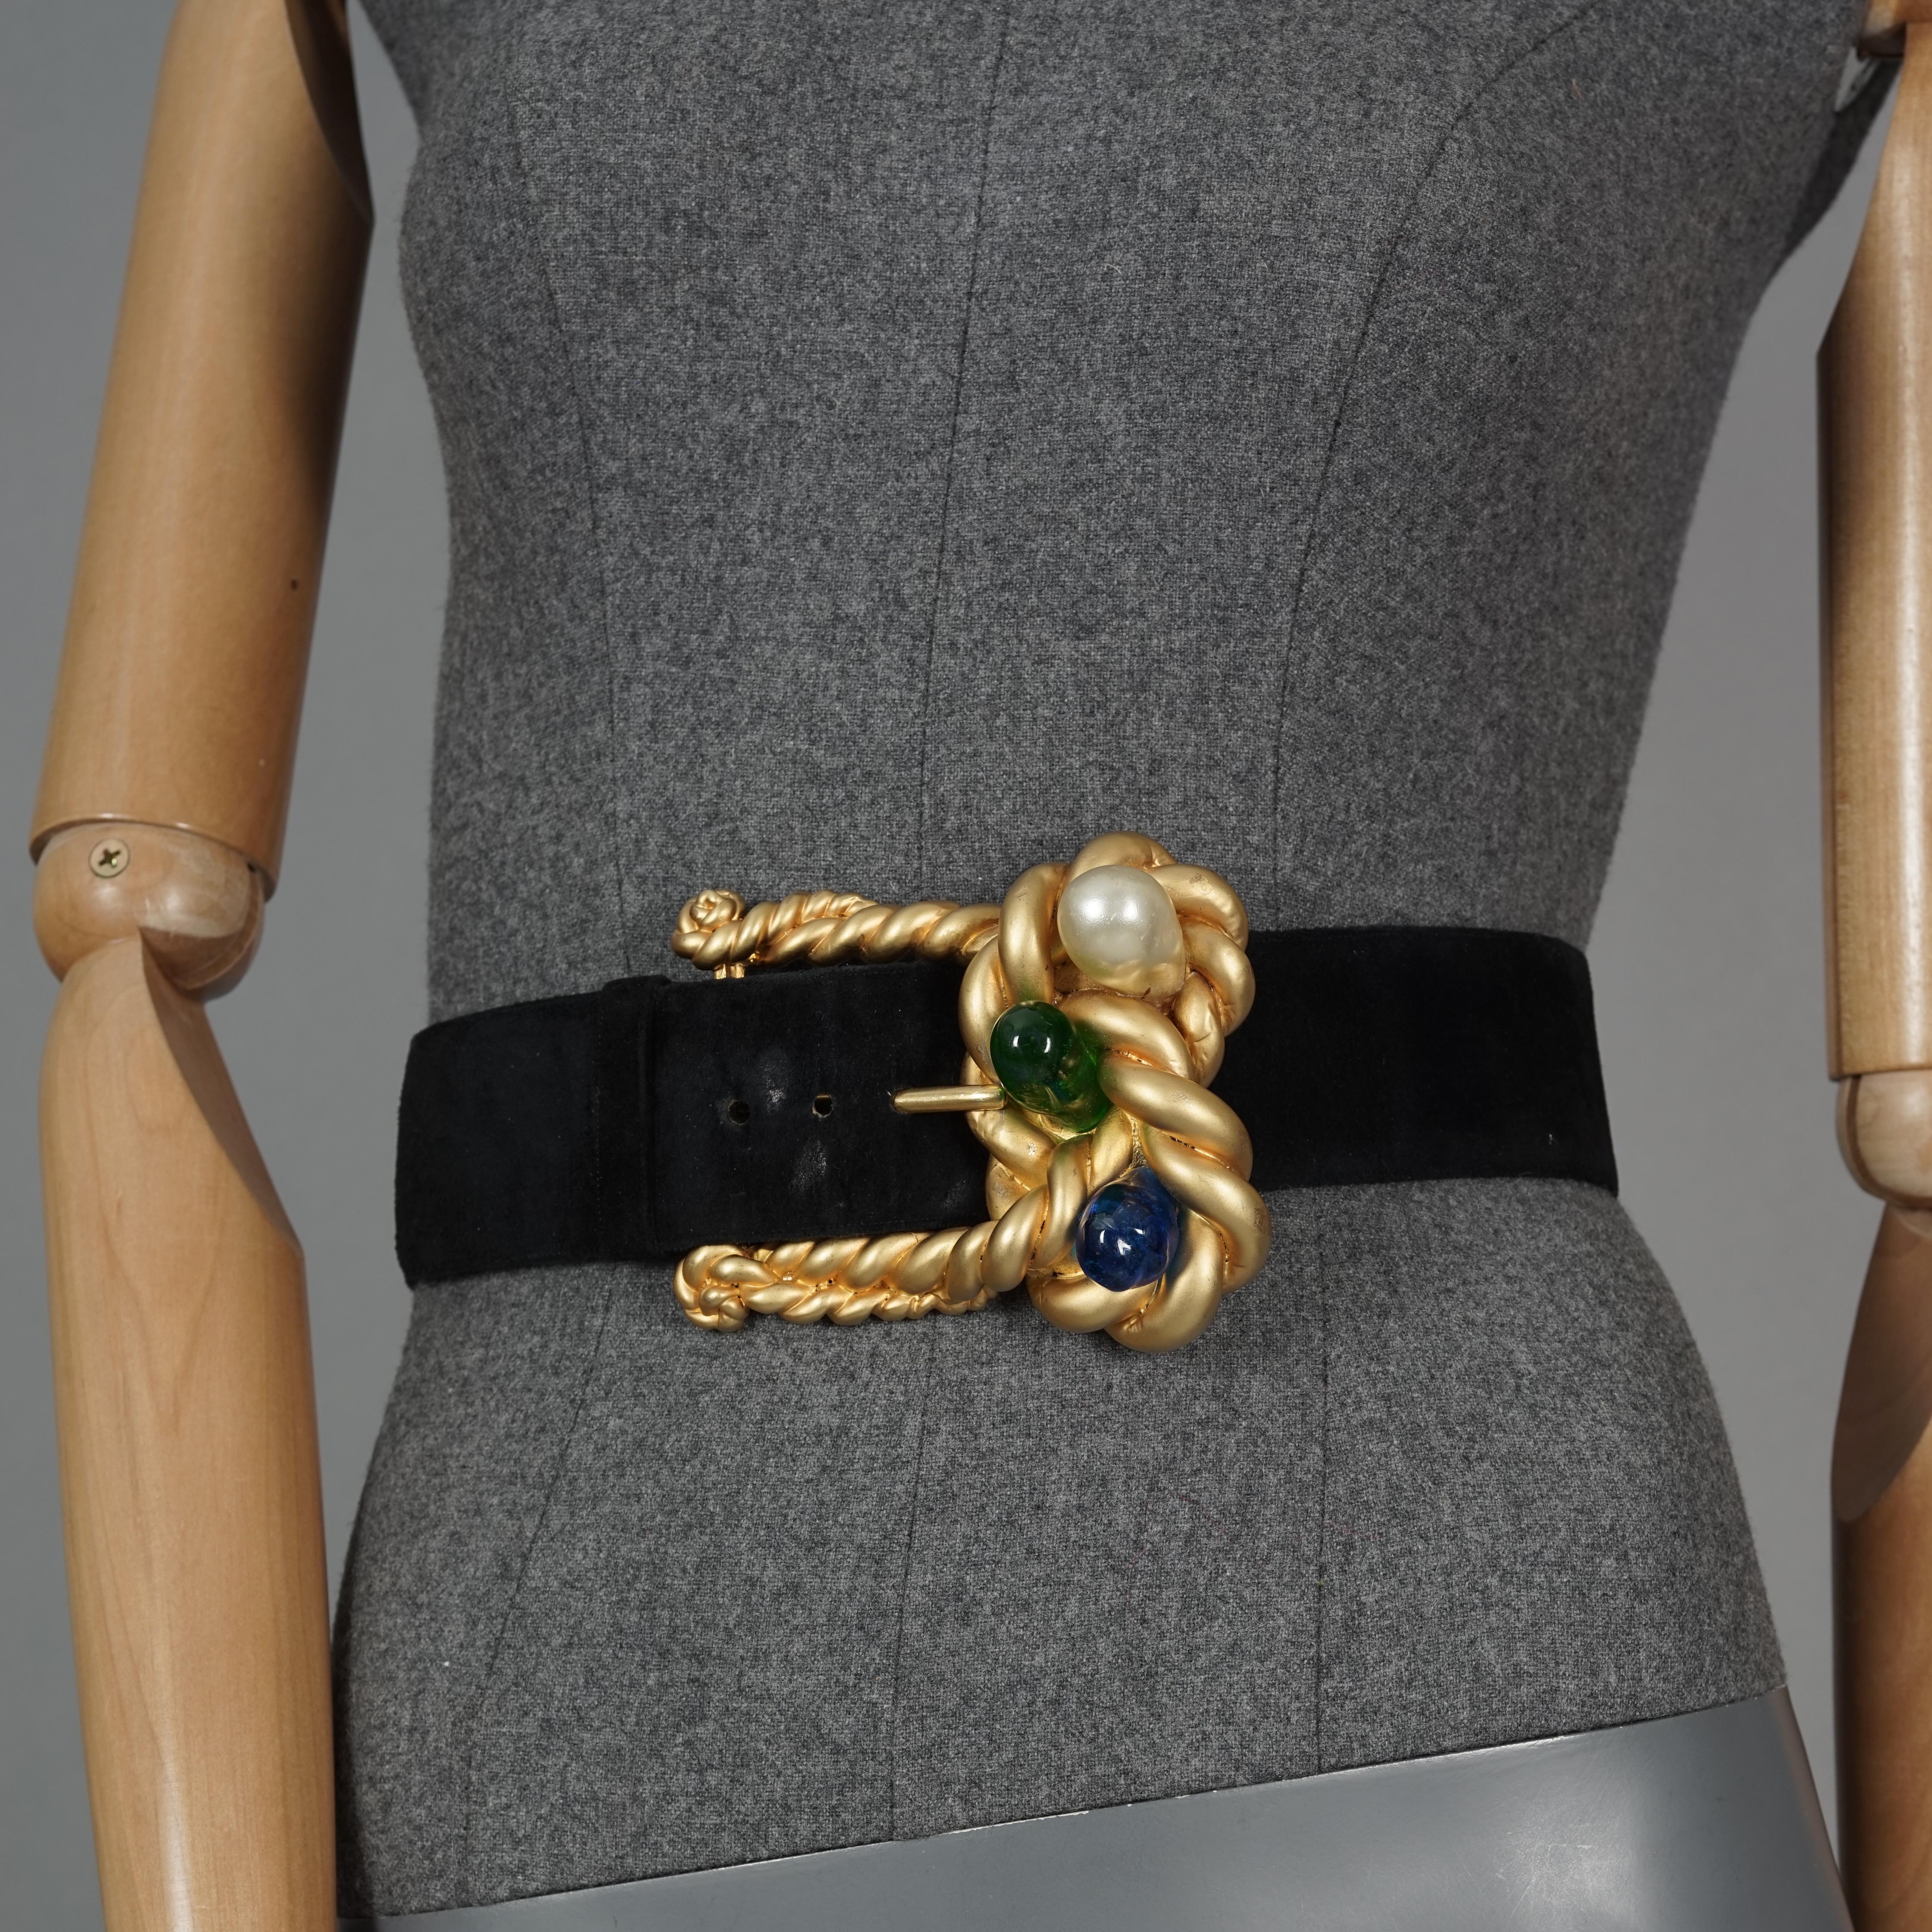 Vintage CHANEL by CASTELLANE Gripoix Pearl Gilt Rope Buckle Leather Belt

Measurements:
Buckle Height: 3.74 inches (9.5 cm)
Belt Hight: 1.97 inches (5 cm)
Wearable Length: 23.62 inches (60 cm) to 26.57 inches (67.5 cm)
Total Length: 32.67 inches (83